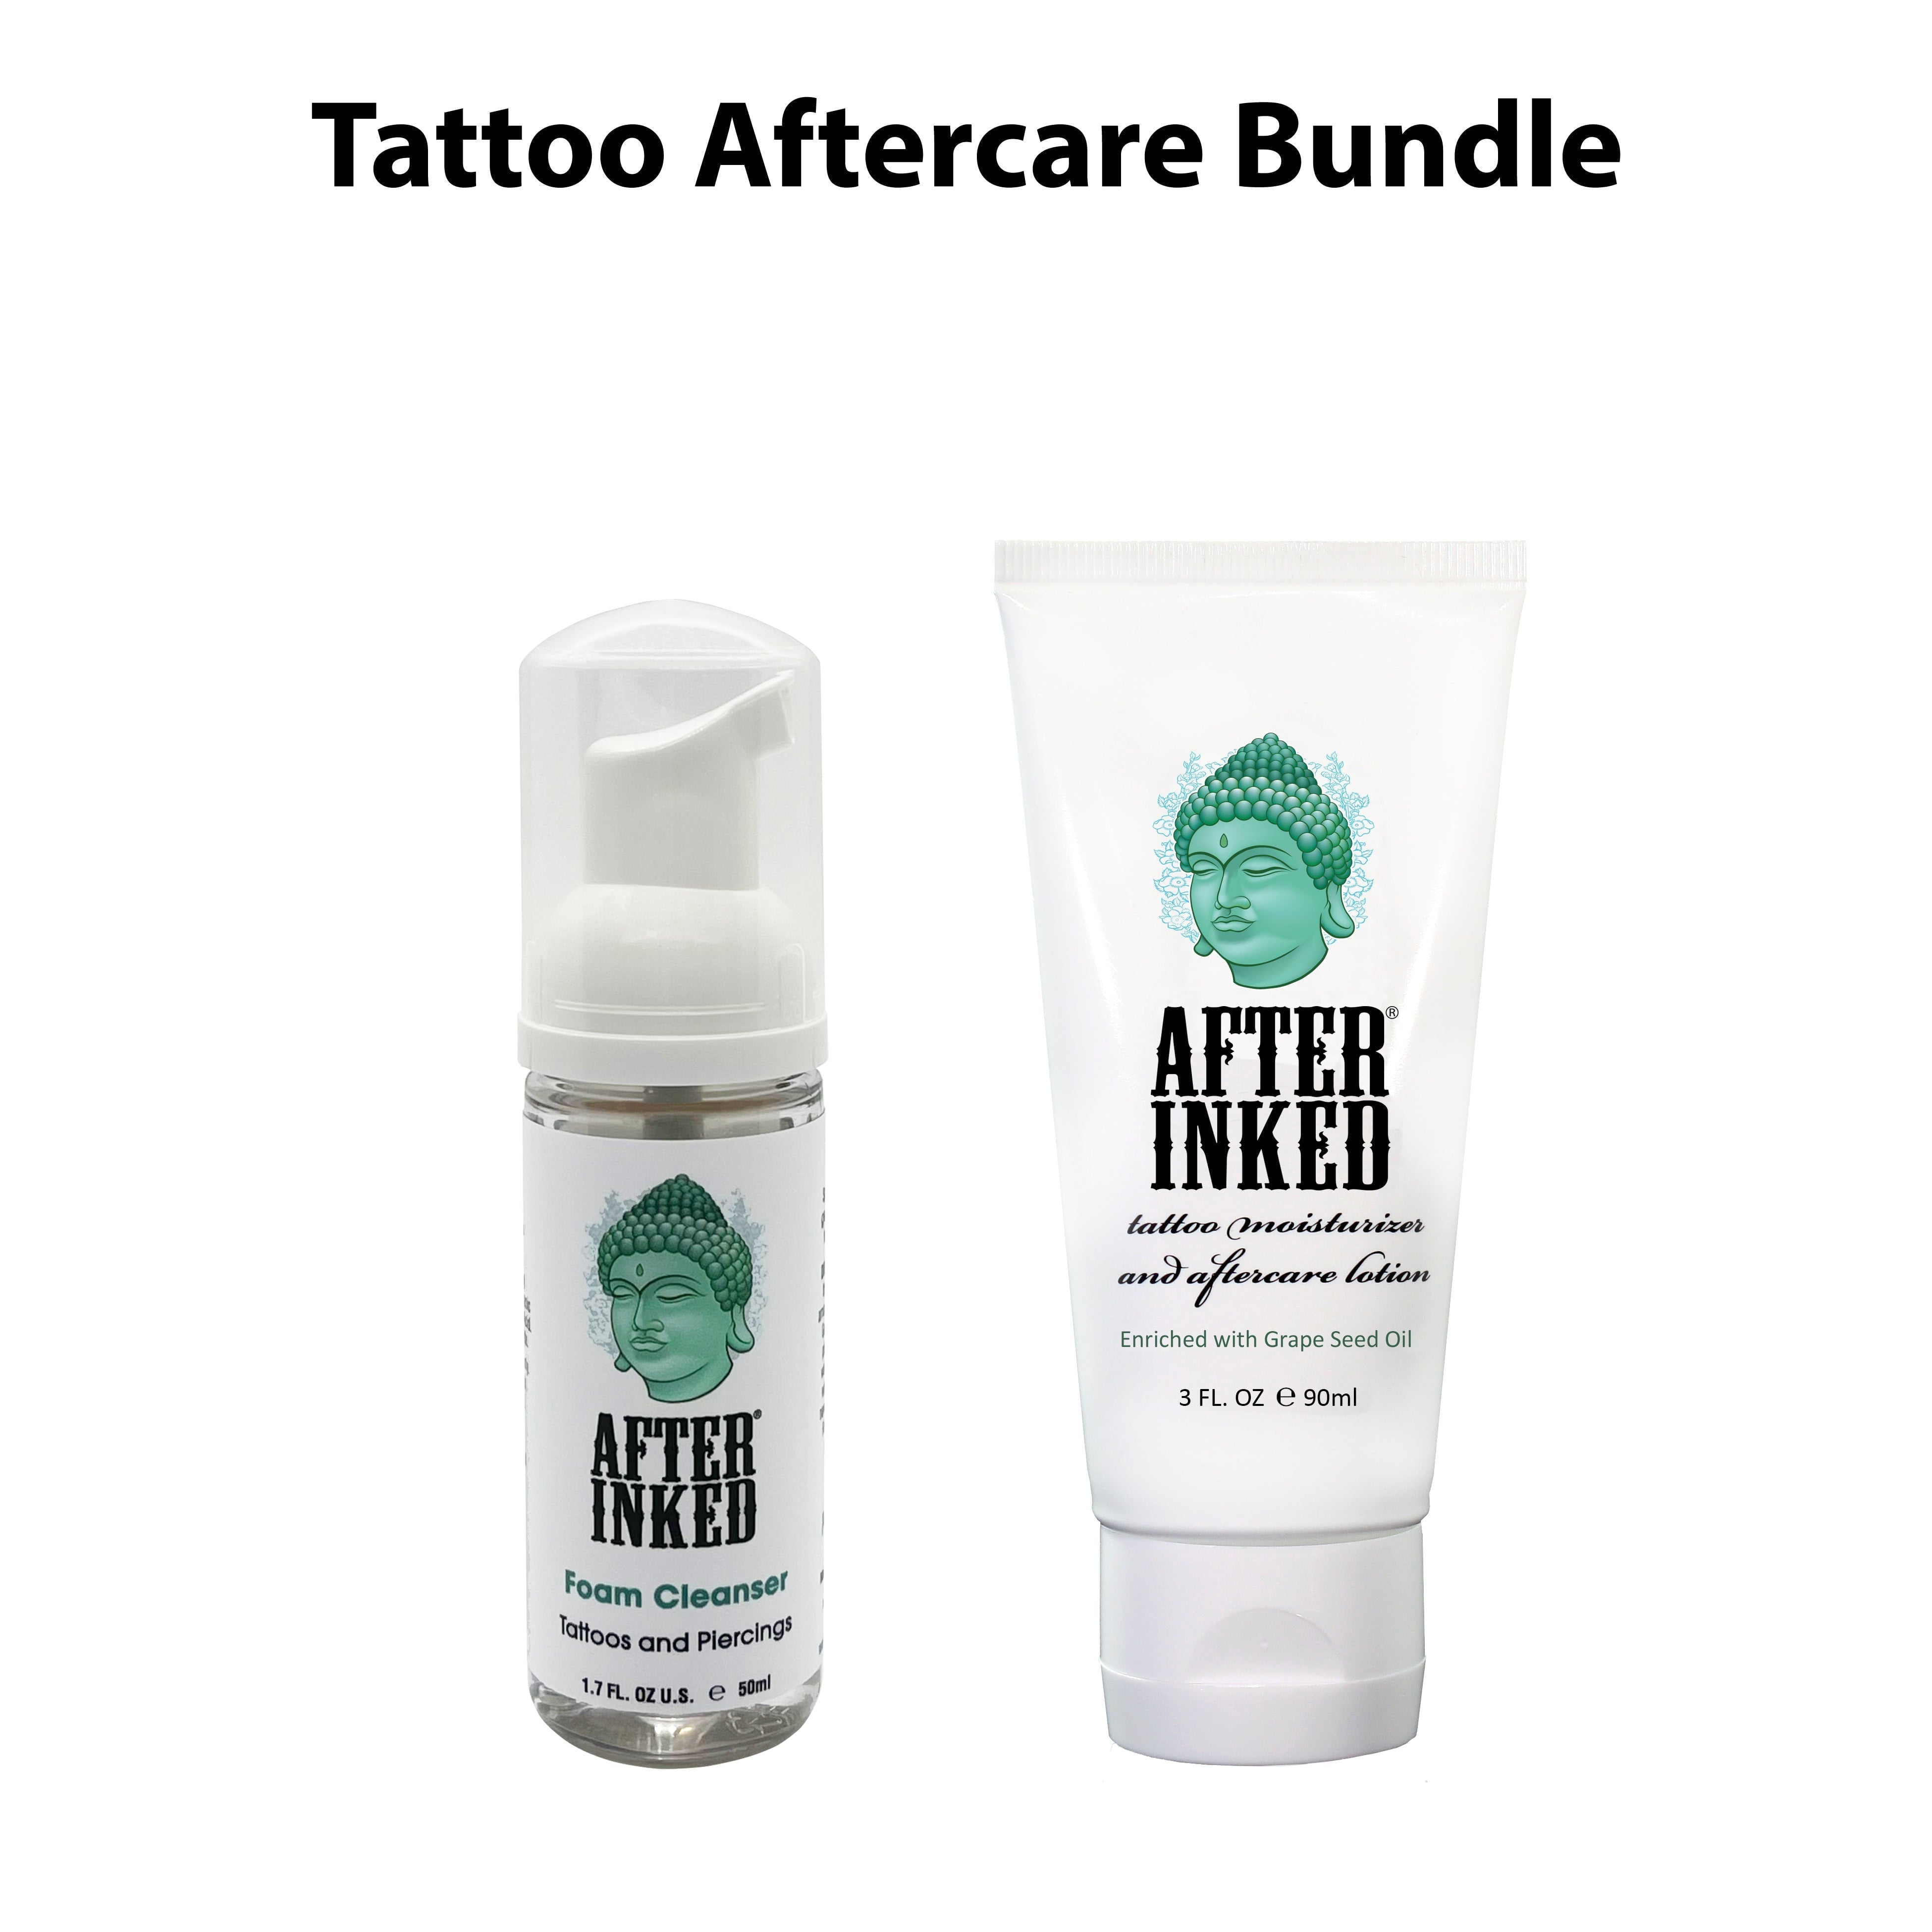 Tattoo Aftercare  care products Award winning Skin Care Est2000